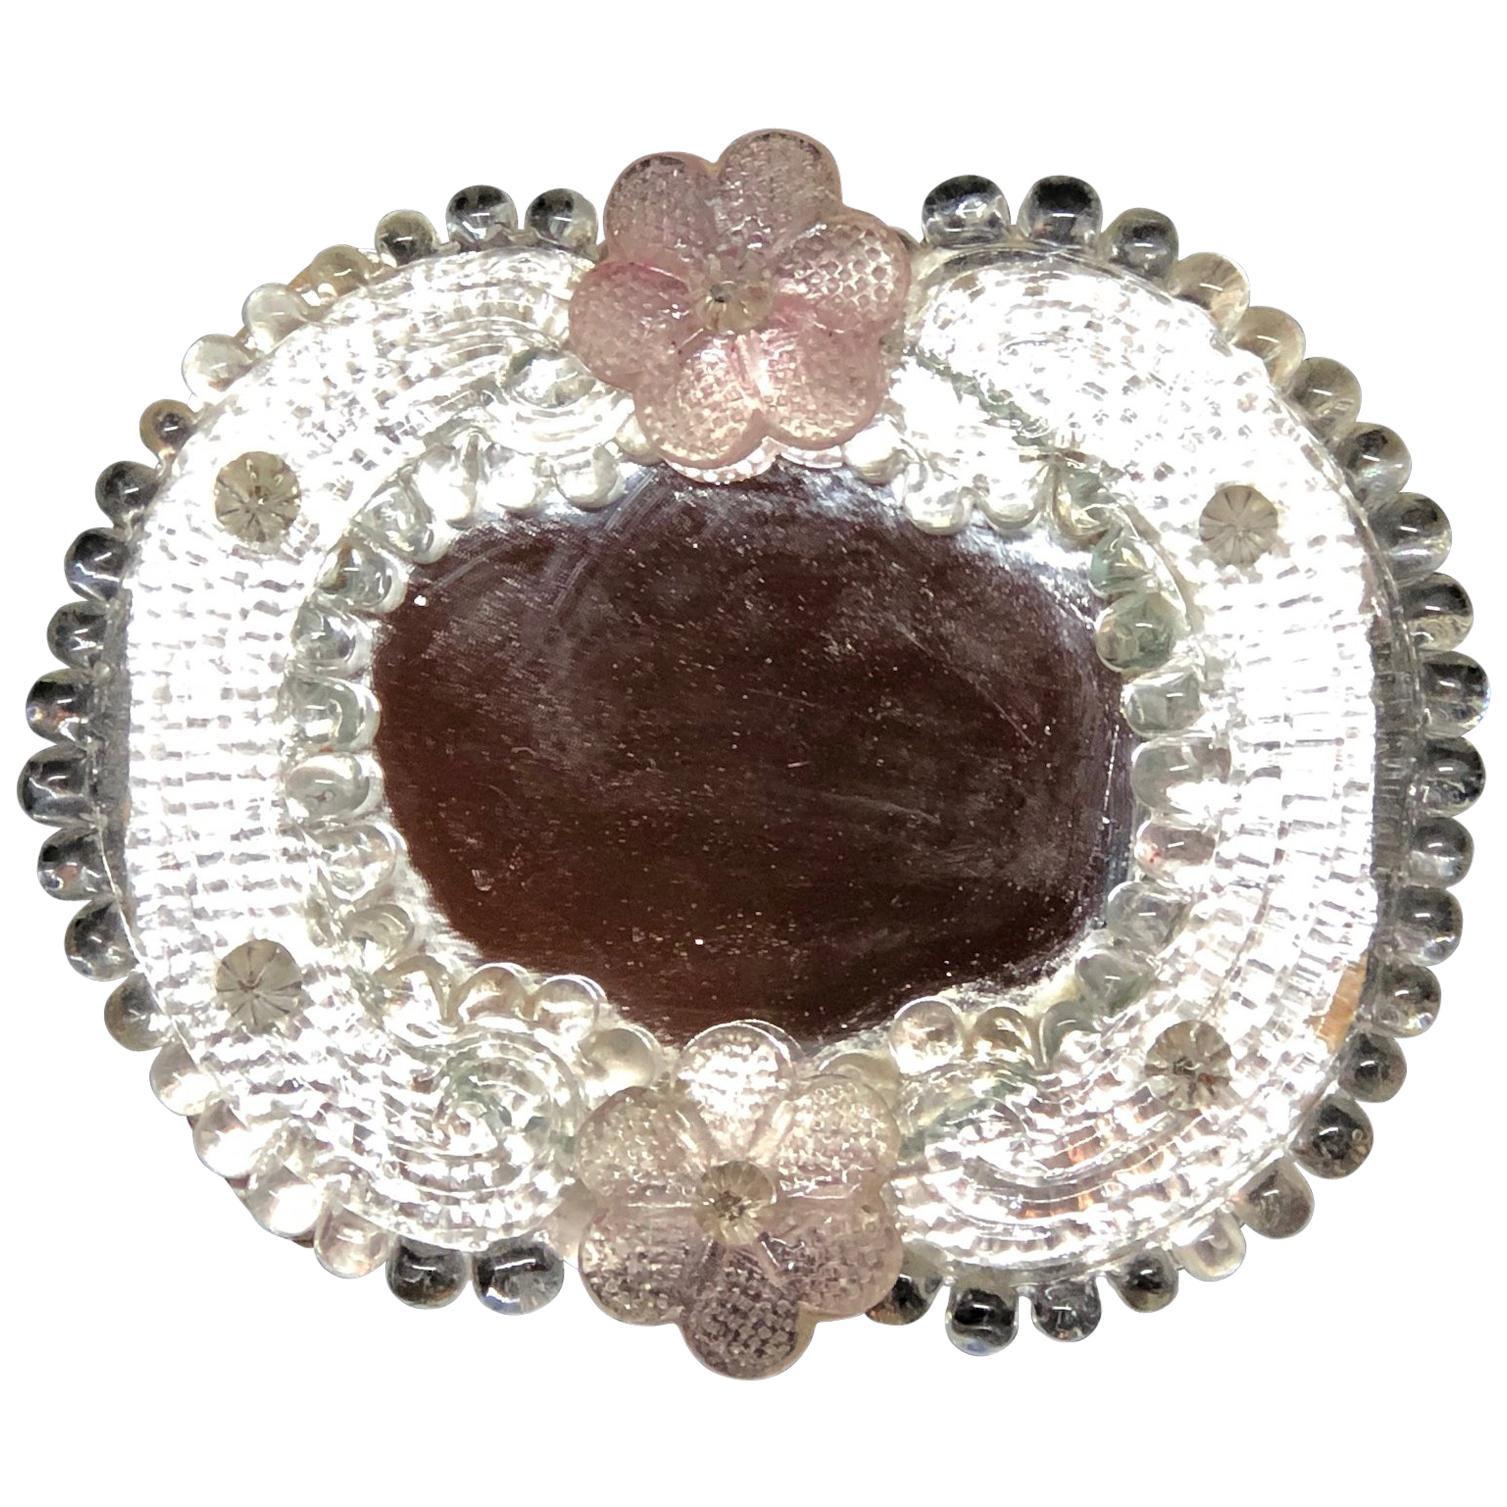 A gorgeous petite Murano glass vanity mirror surrounded with handmade light pink flowers. Can be used as a wall mirror. With minor signs of wear as expected with age and use. A nice addition to any girls or ladies room.